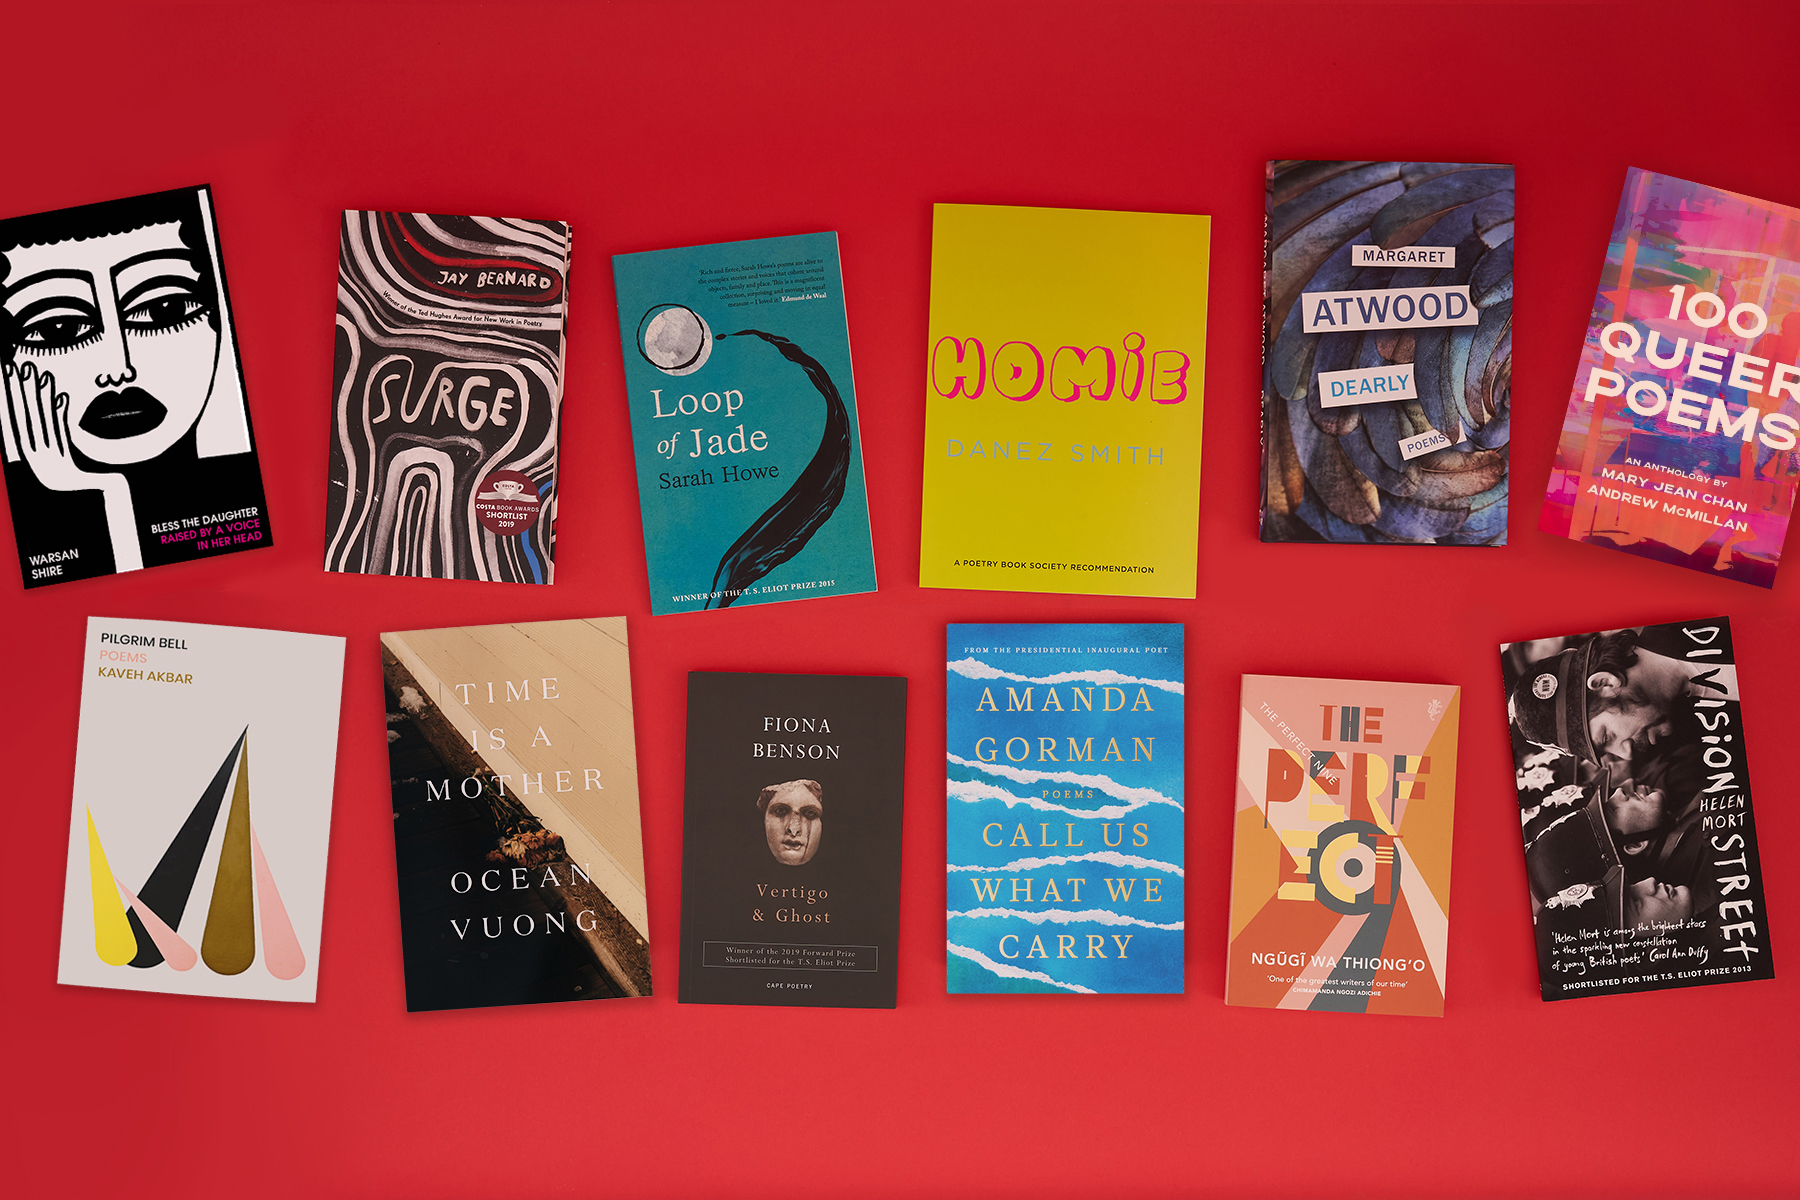 Flat lay of 12 poetry collections against a bright red background.